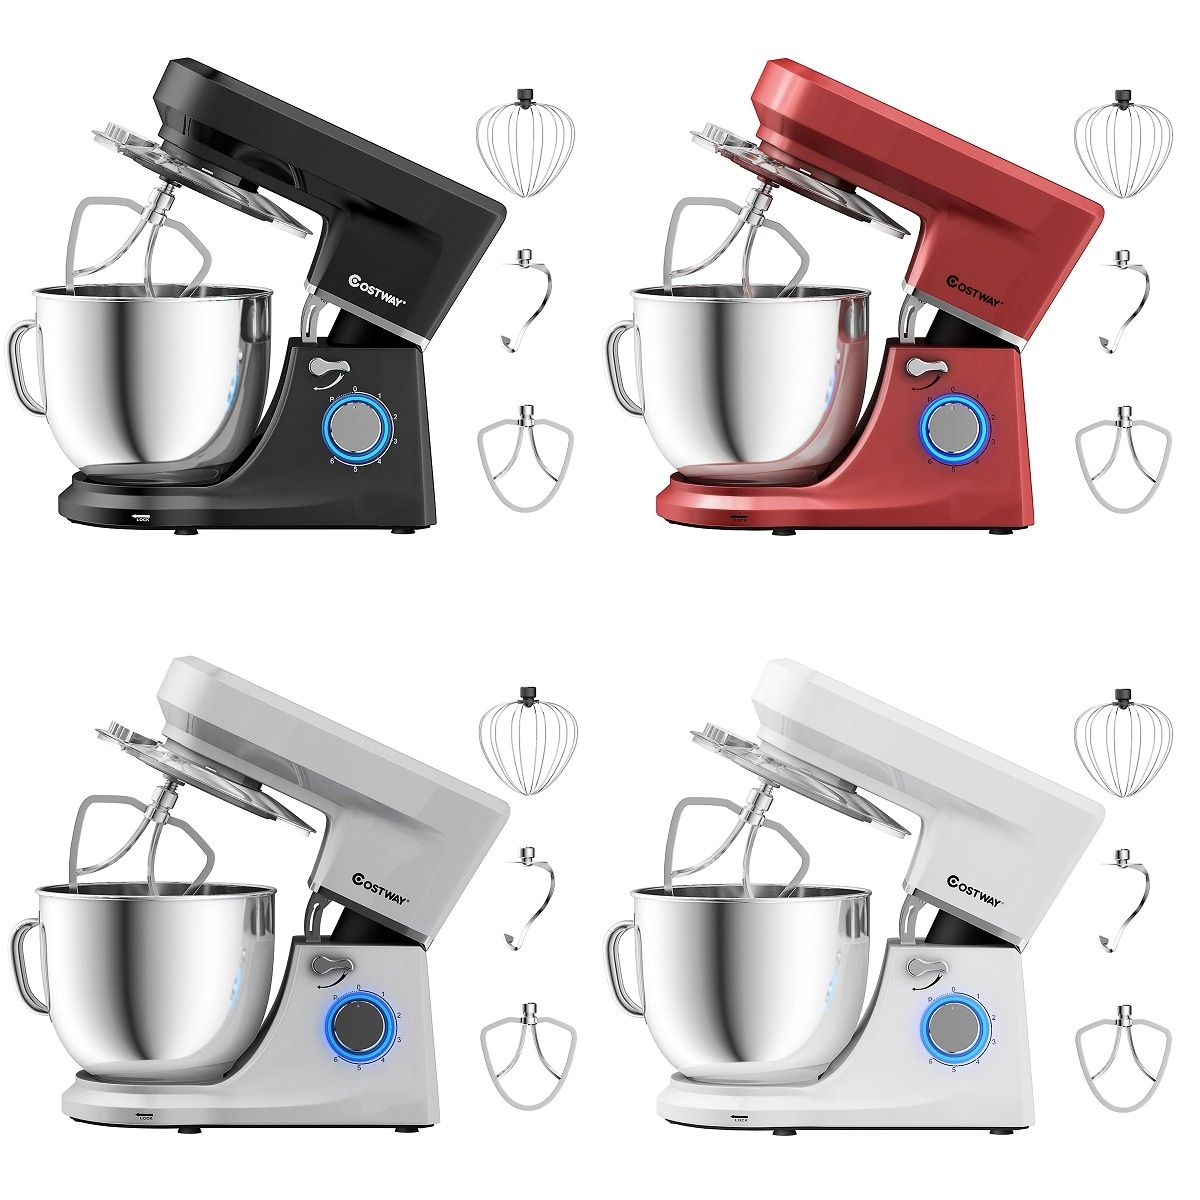 https://ak1.ostkcdn.com/images/products/is/images/direct/3c02ec78a19bcaff9a0ce4d0df1745175fca8508/Tilt-Head-Stand-Mixer-7.5-Qt-6-Speed-660W-with-Dough-Hook%2C-Whisk-%26-Beater.jpg